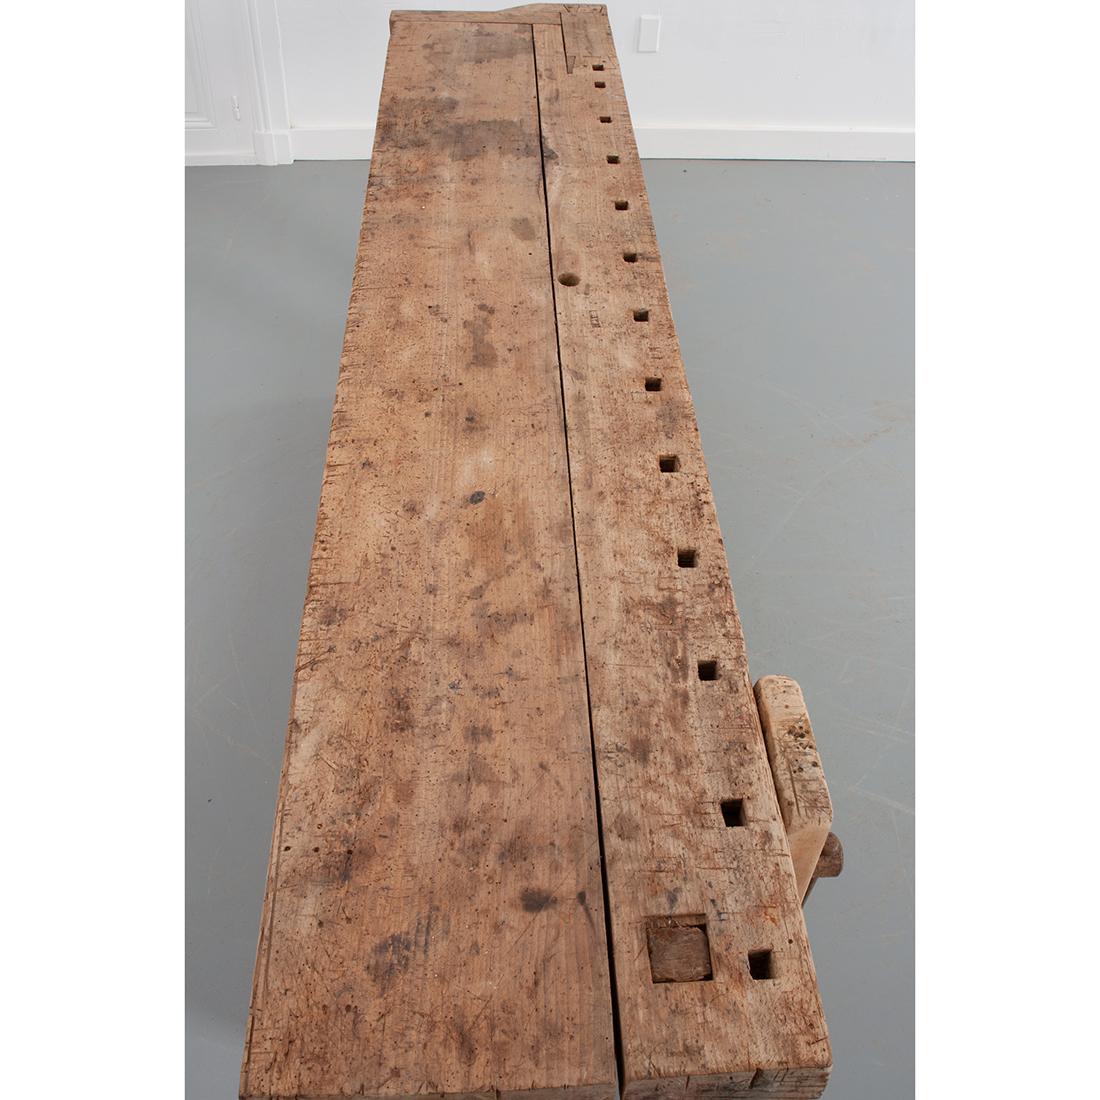 This Artisan’s bench from Burgundy France is made of unfinished beech and iron. Years of use shows on the surfaces of this table and its patina adds such character to this piece. It has two functional vises or clamps with hand forged iron turns and